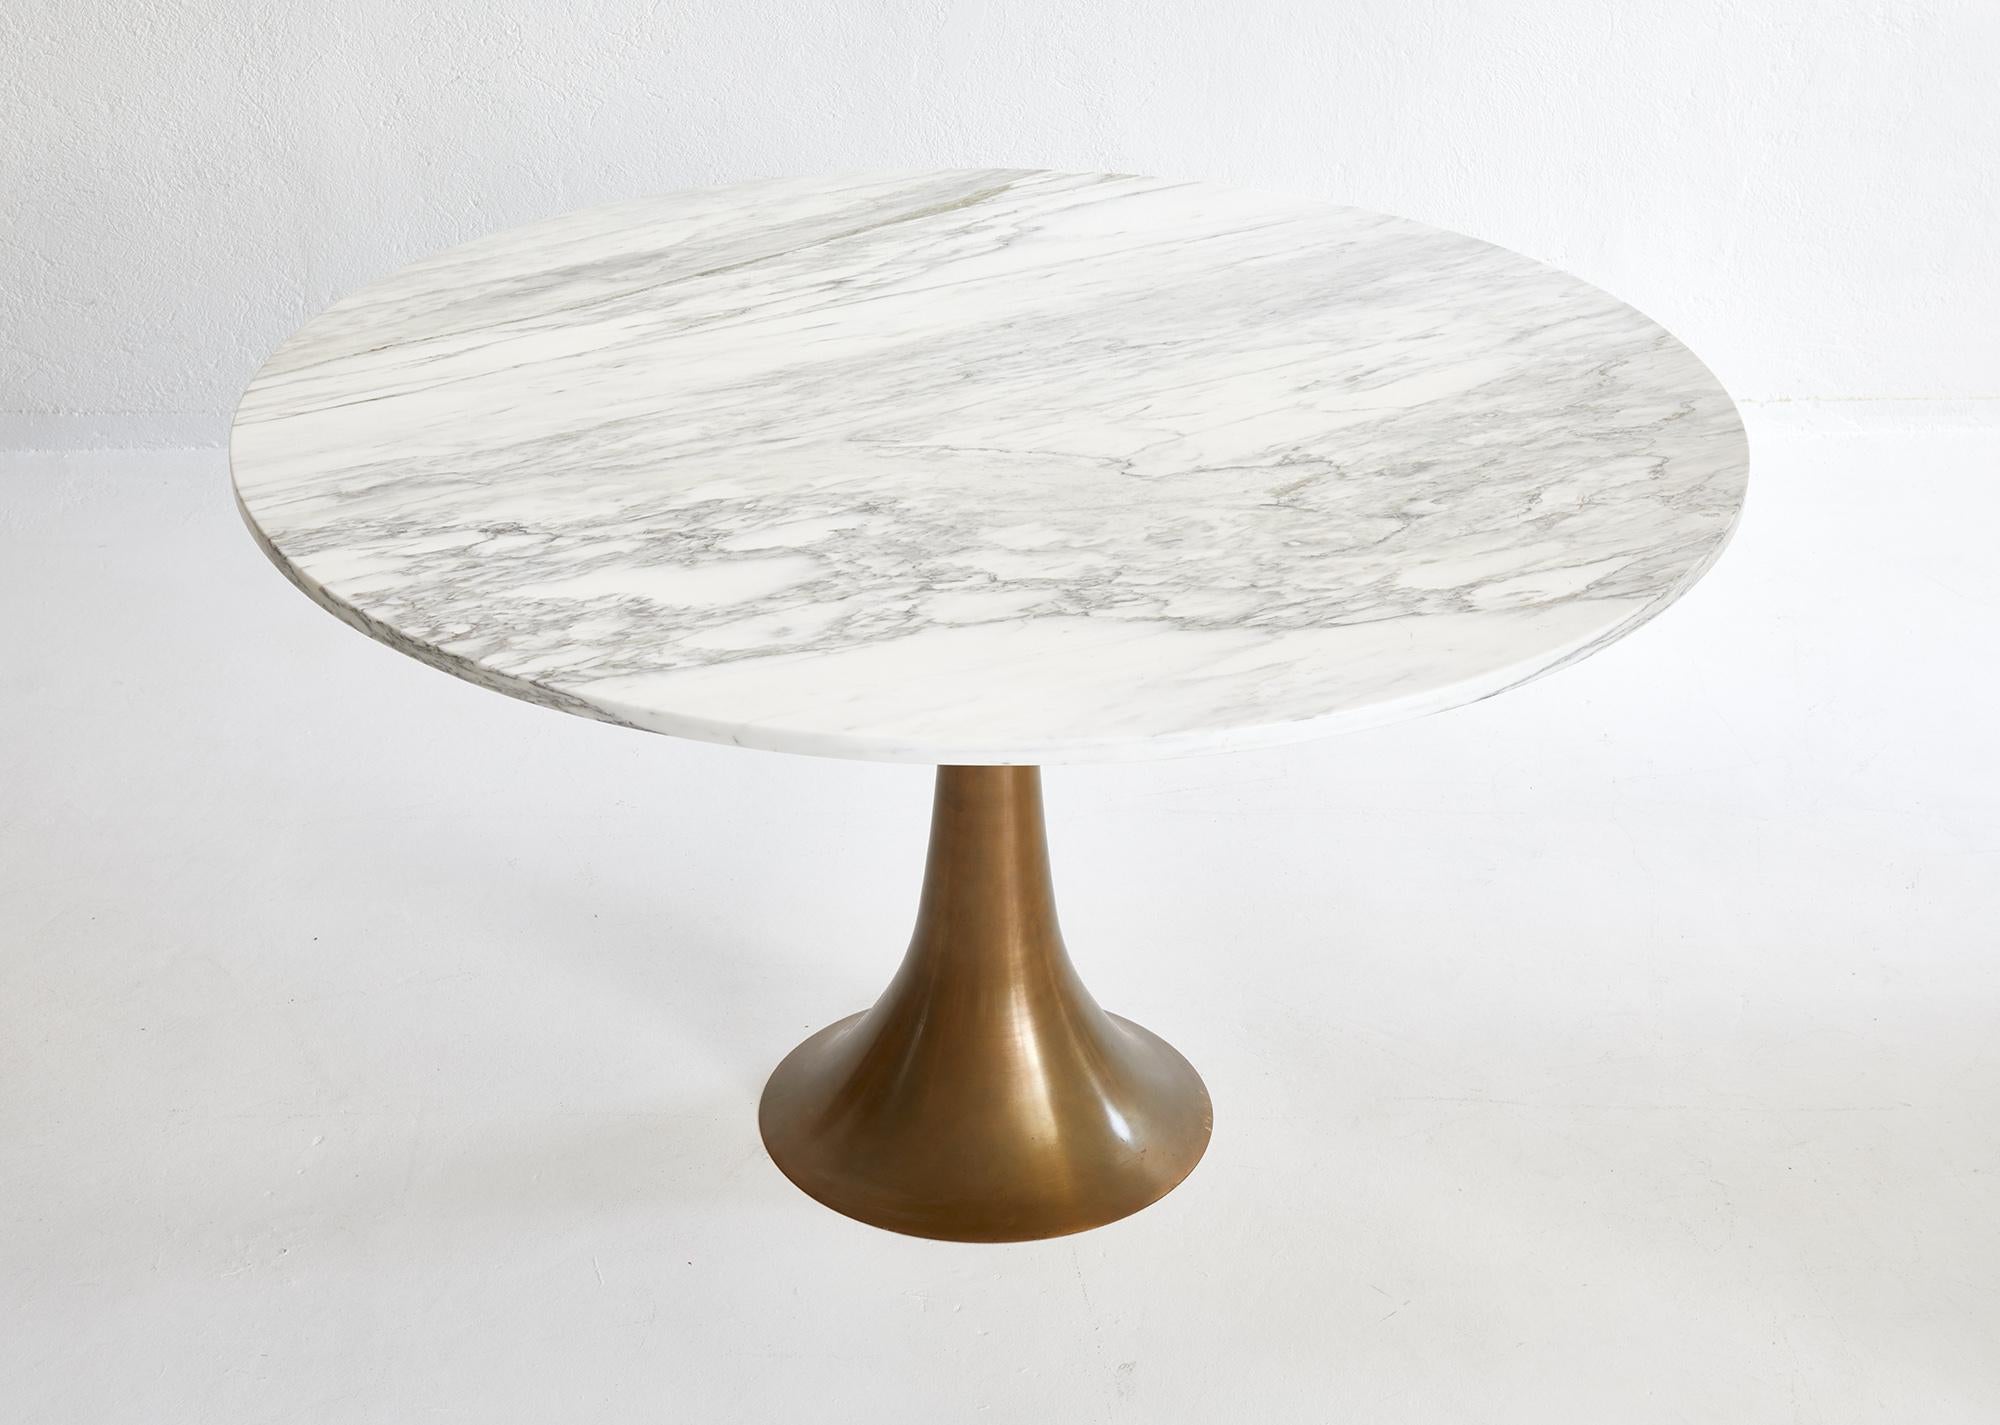 Dining table by Angelo Mangiarotti model 302 produced by Bernini, Italy 1959.

This stunning dining table is composed of a large circular arabescato marble top mounted on a tulip shaped and handcrafted cast bronze base.

The top measures 140 cm in